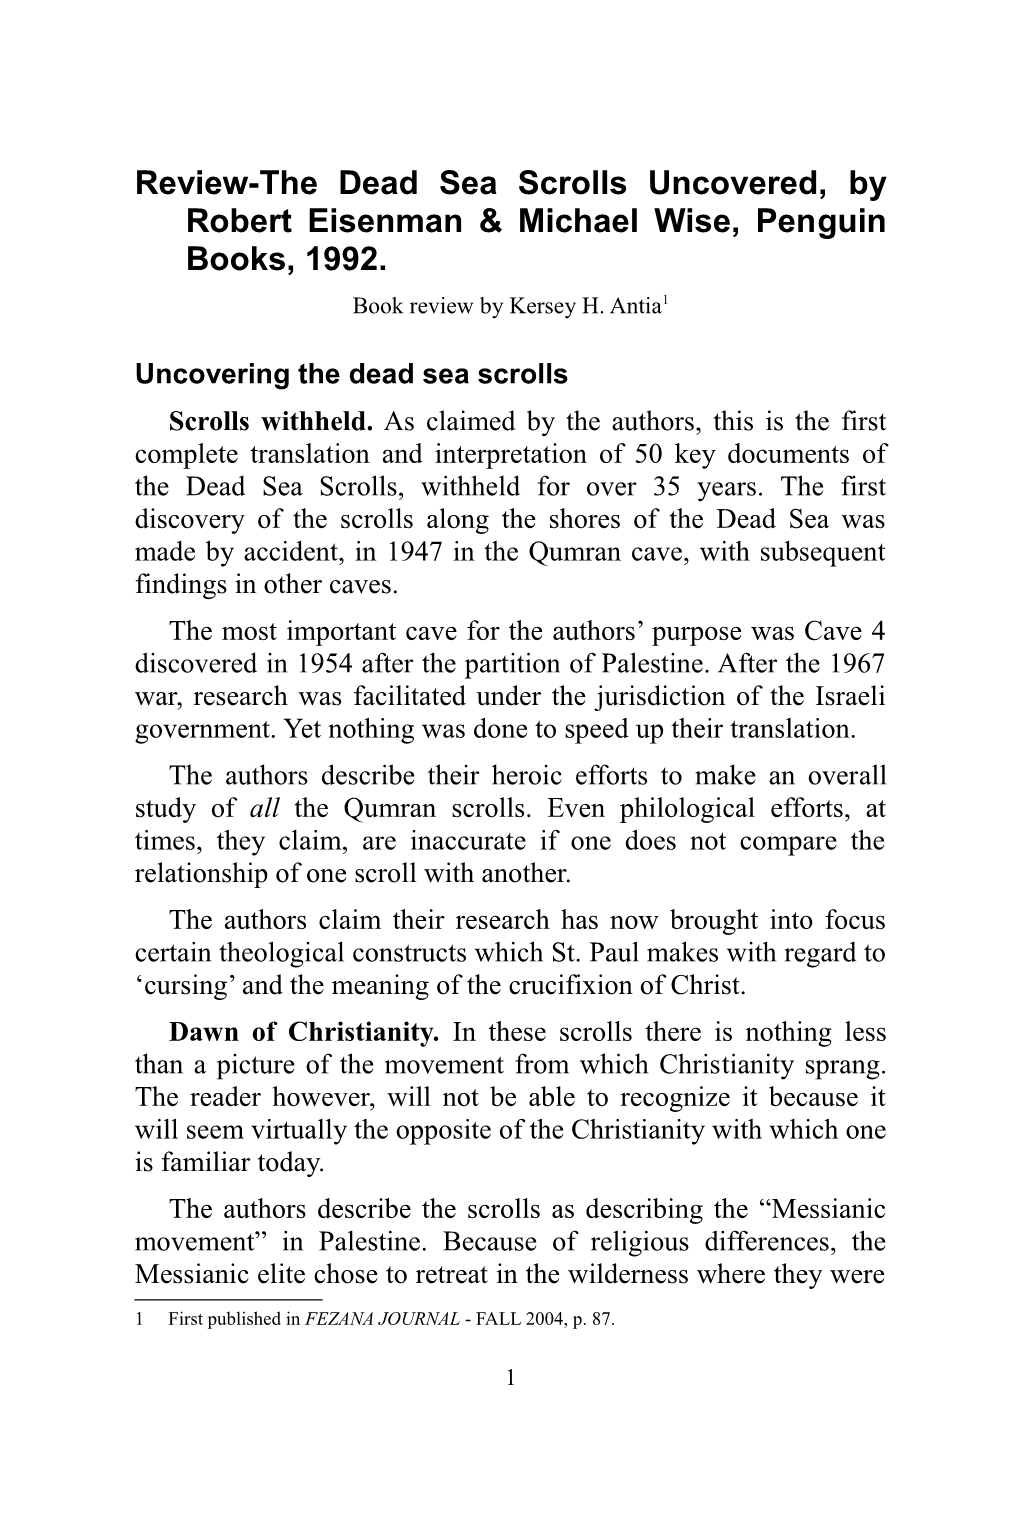 Review-The Dead Sea Scrolls Uncovered, by Robert Eisenman & Michael Wise, Penguin Books, 1992